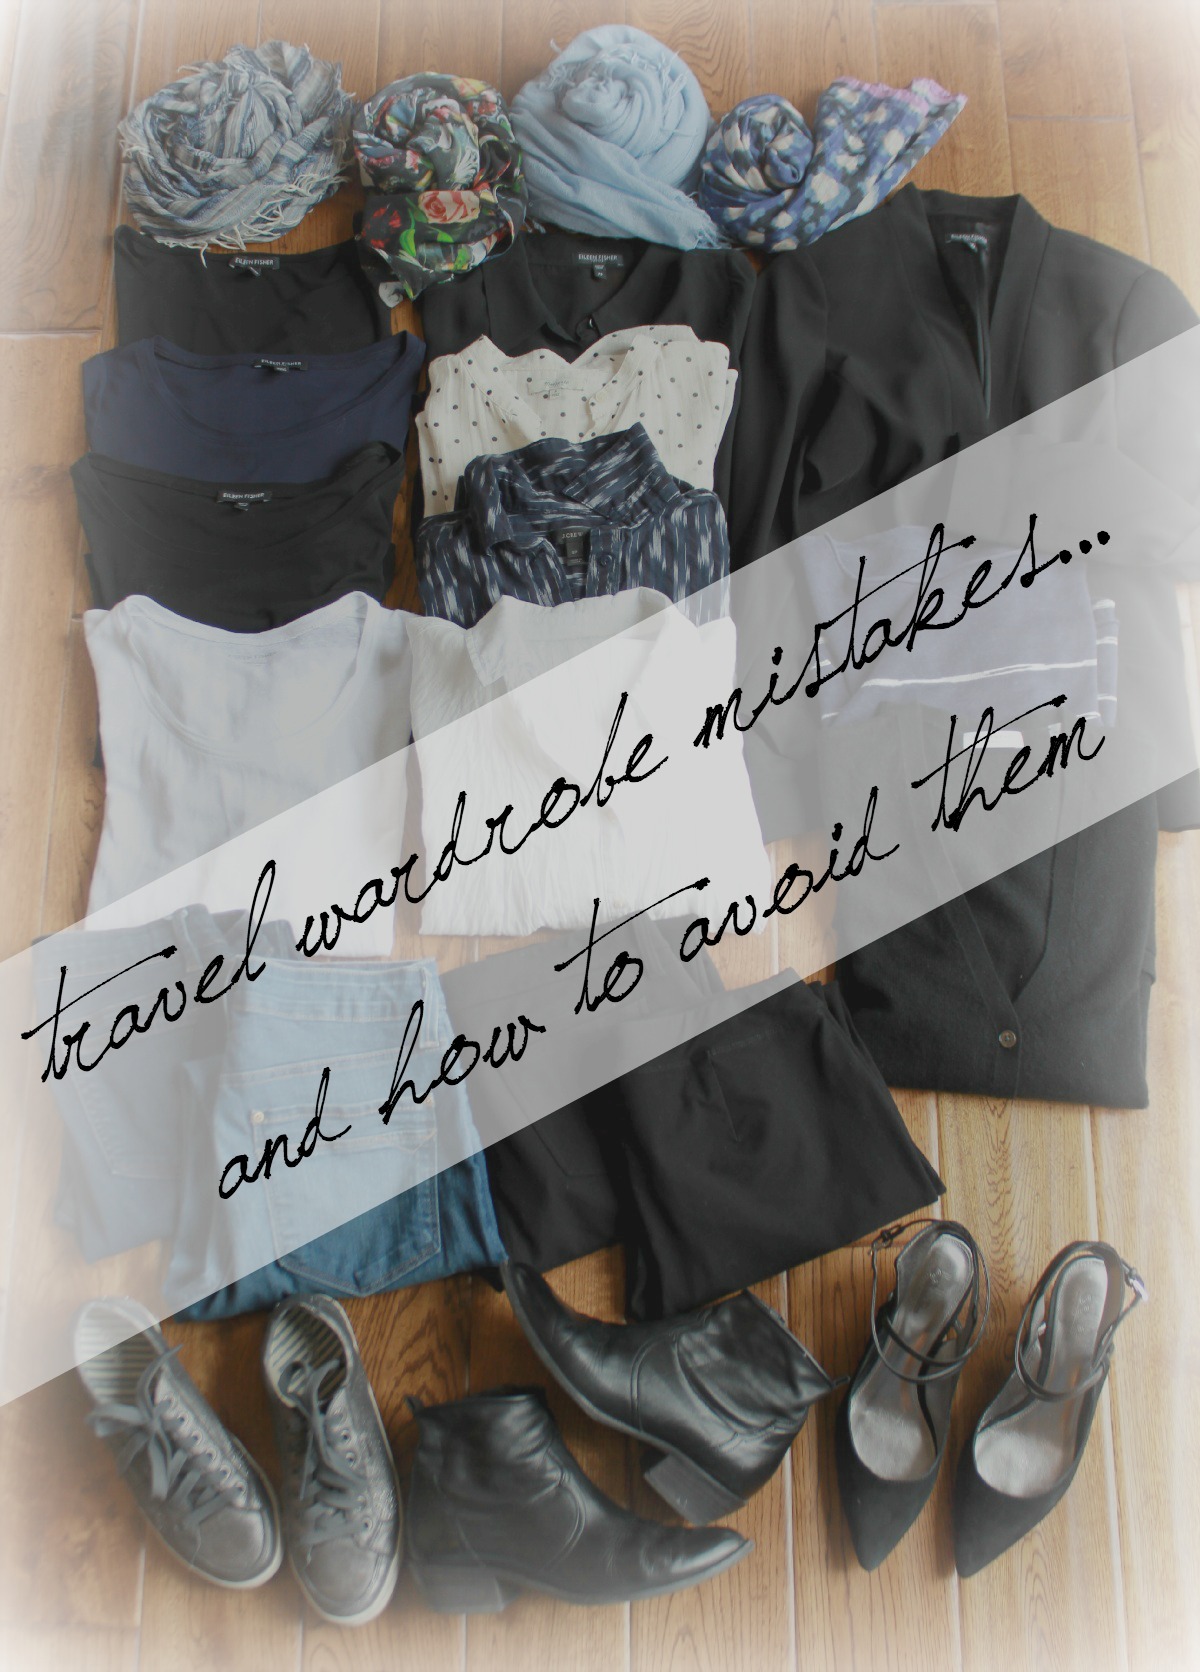 Avoid these 5 travel wardrobe mistakes with my packing tips. Details at une femme d'un certain age.